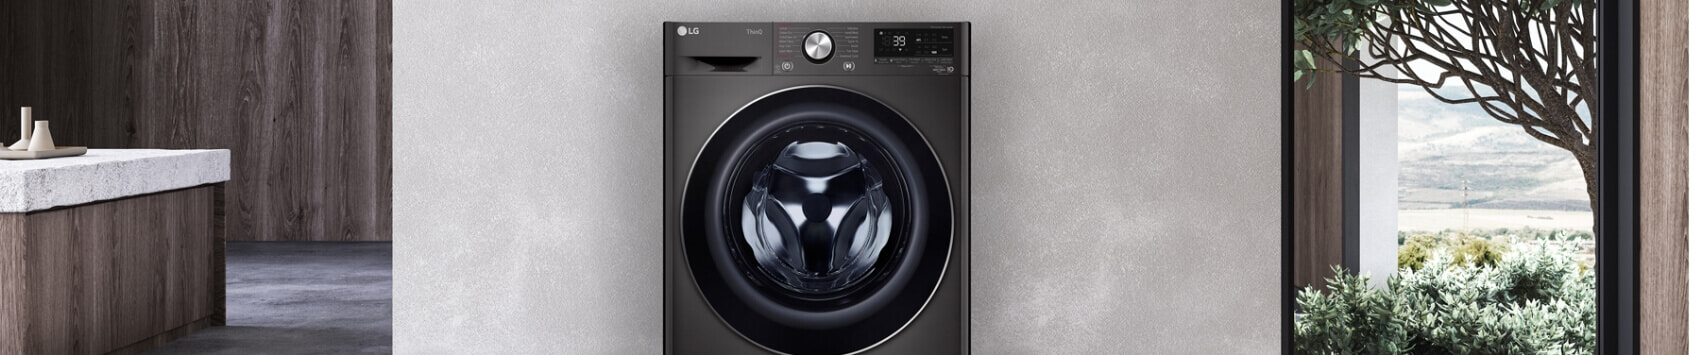 LG 5-star washing machine that is energy efficient in a green household.